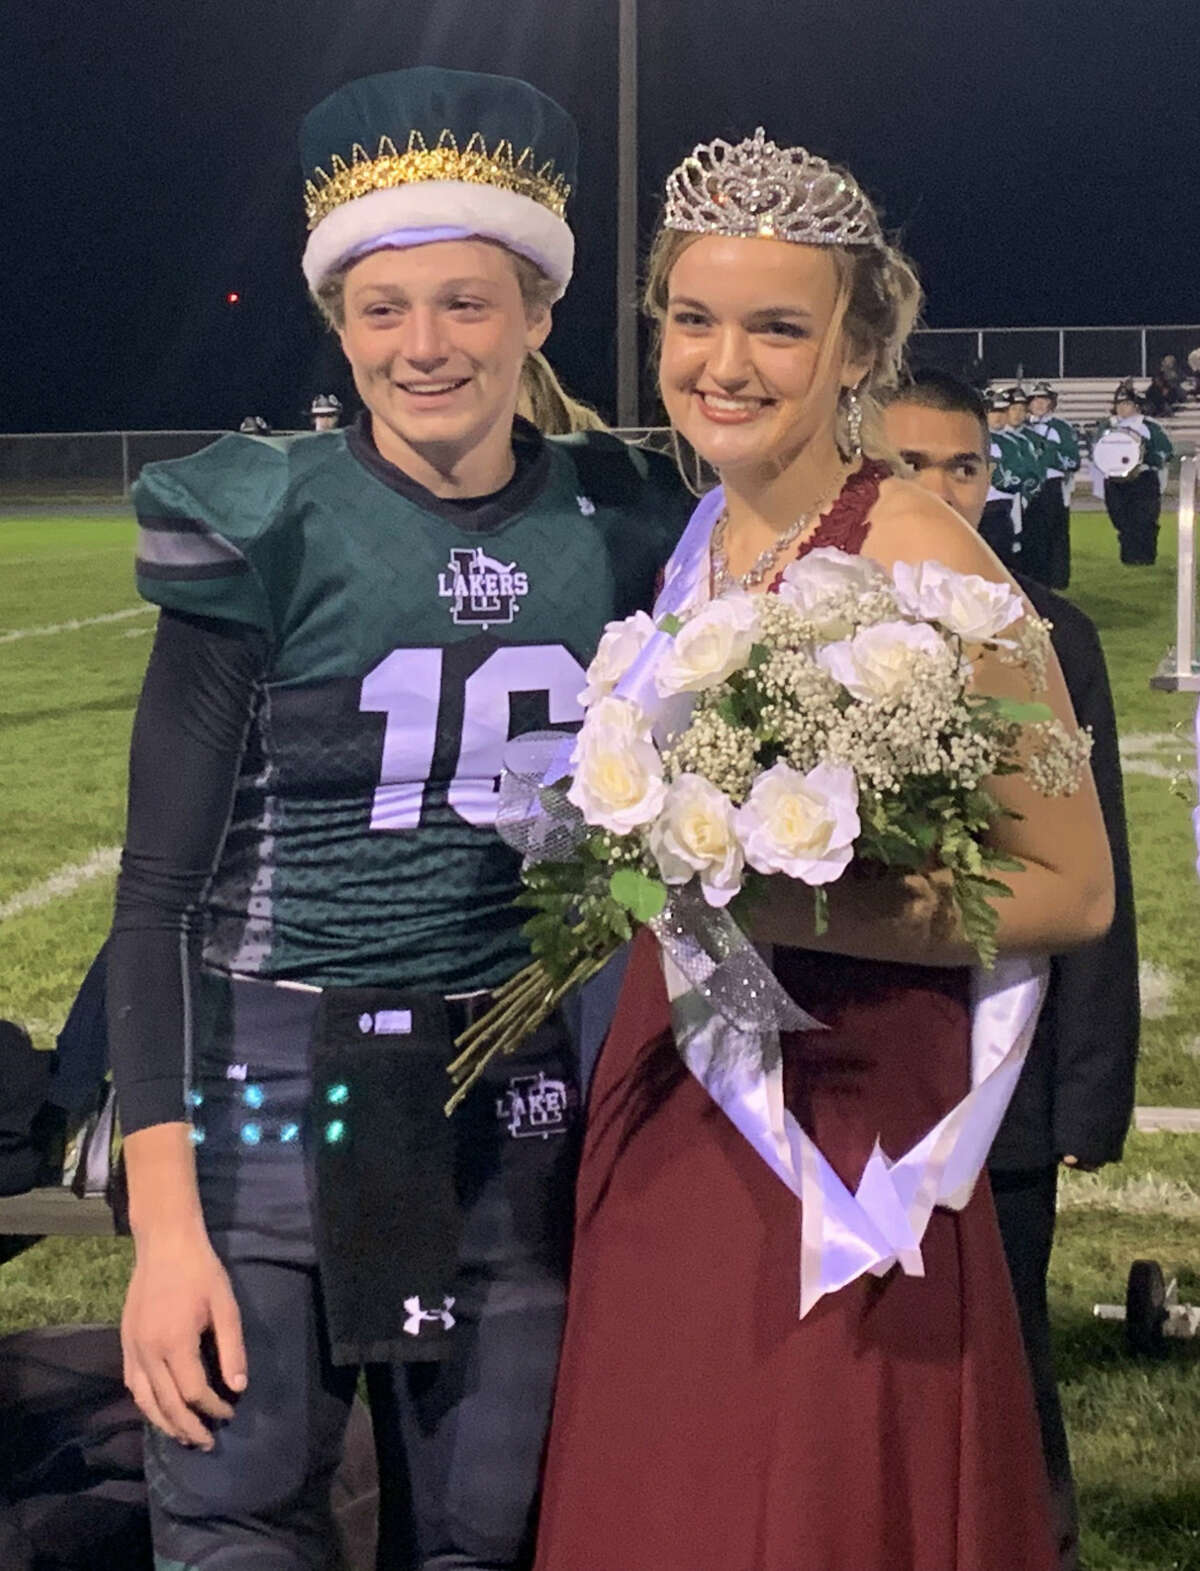 The 2019 Laker Homecoming King and Queen are Bryce Sears and Emma Irion. Bryce is the son of Craig and Tina Sears. Emma is the daughter of Lonnie and Susie Irion.